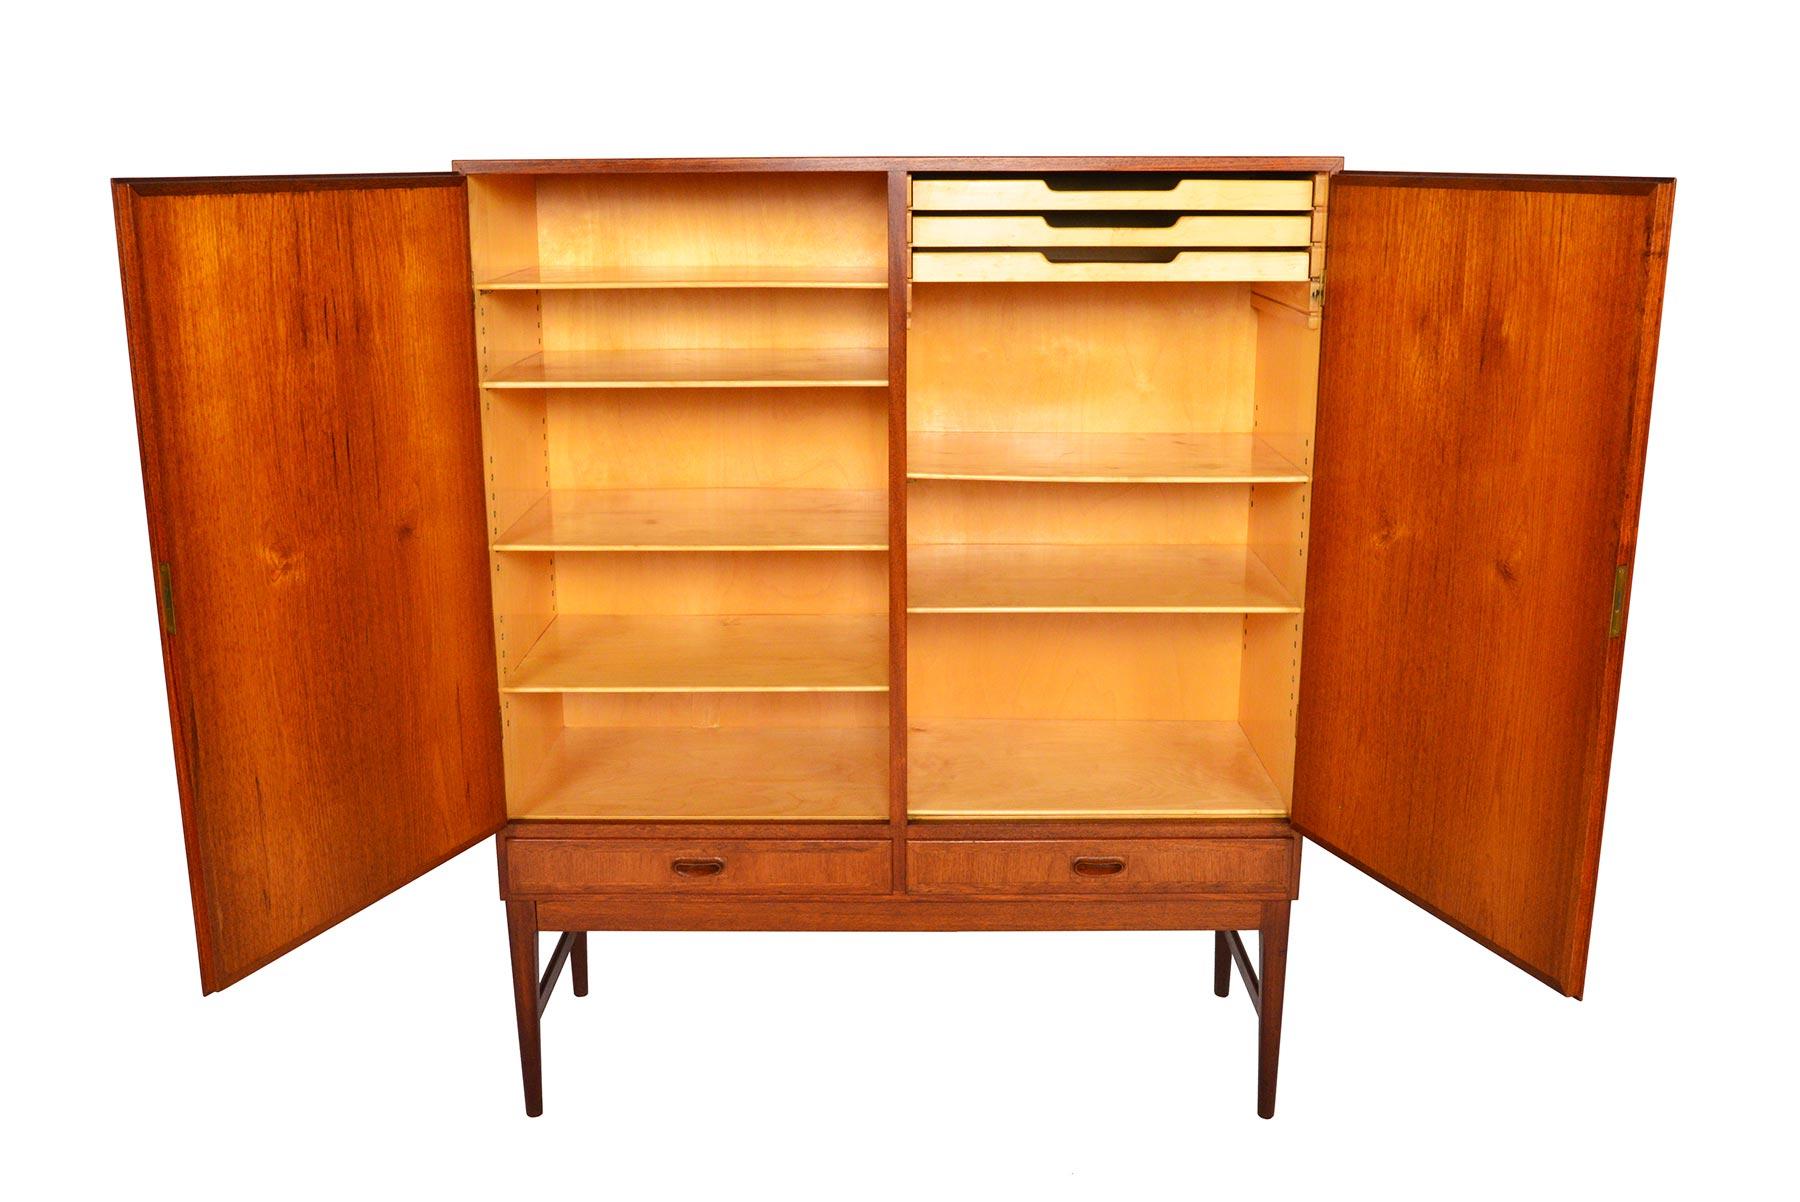 This Danish modern teak bureau offers a large storage capacity and sleek design. Two large locking doors open to reveal a beech- lined, two bay interior outfitted with six adjustable shelves and three felt lined drawers. Two lower drawers provide